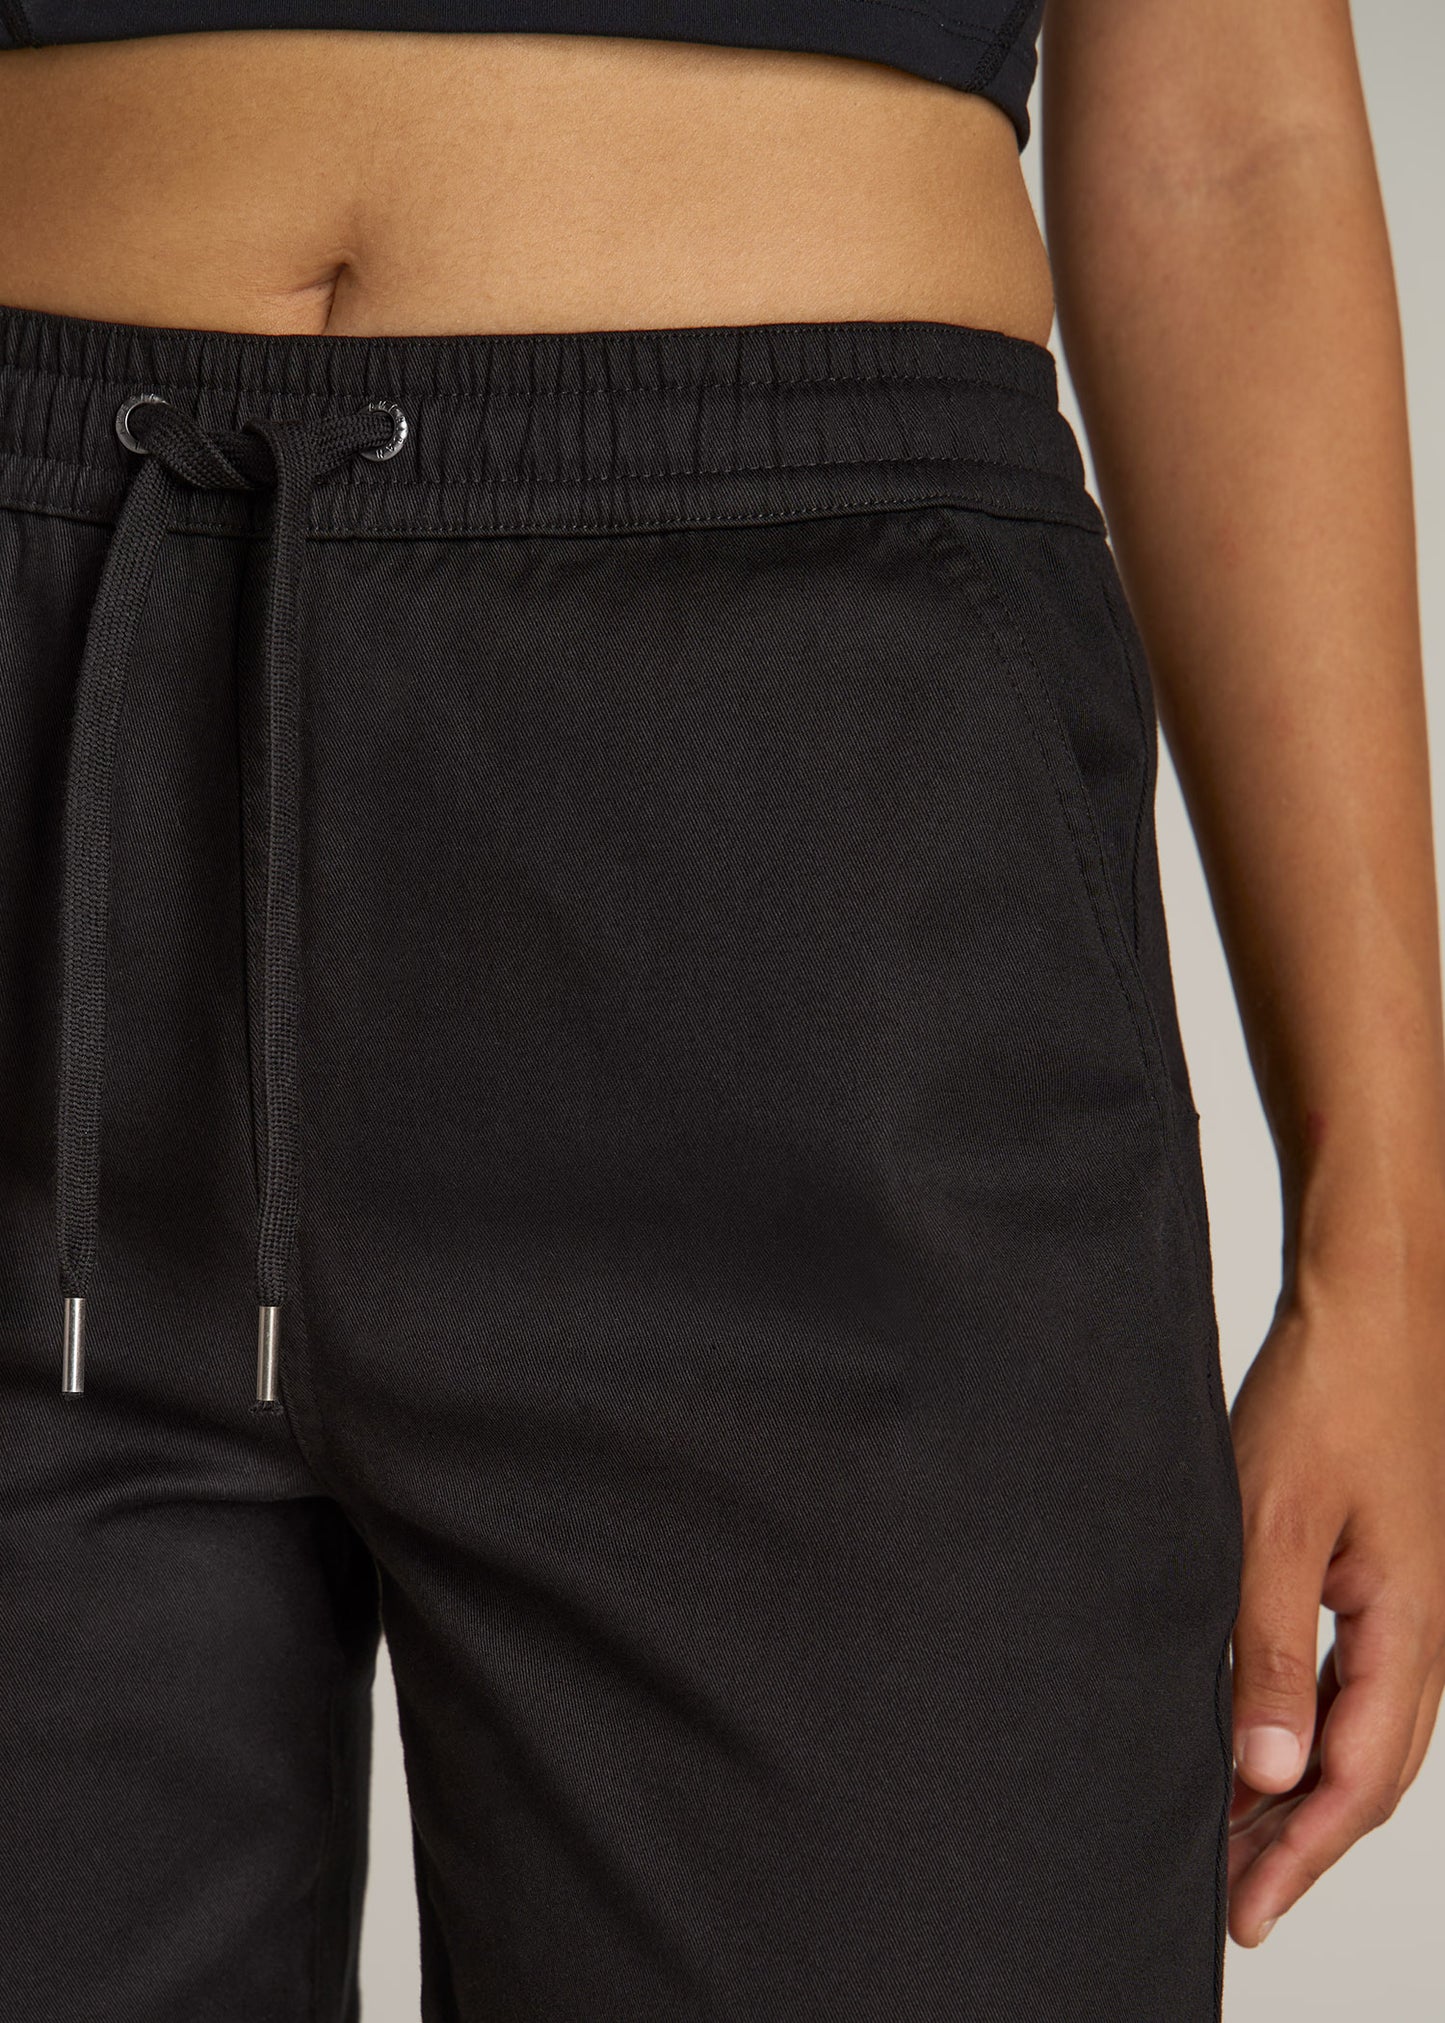 Twill Jogger Pants for Tall Women | American Tall